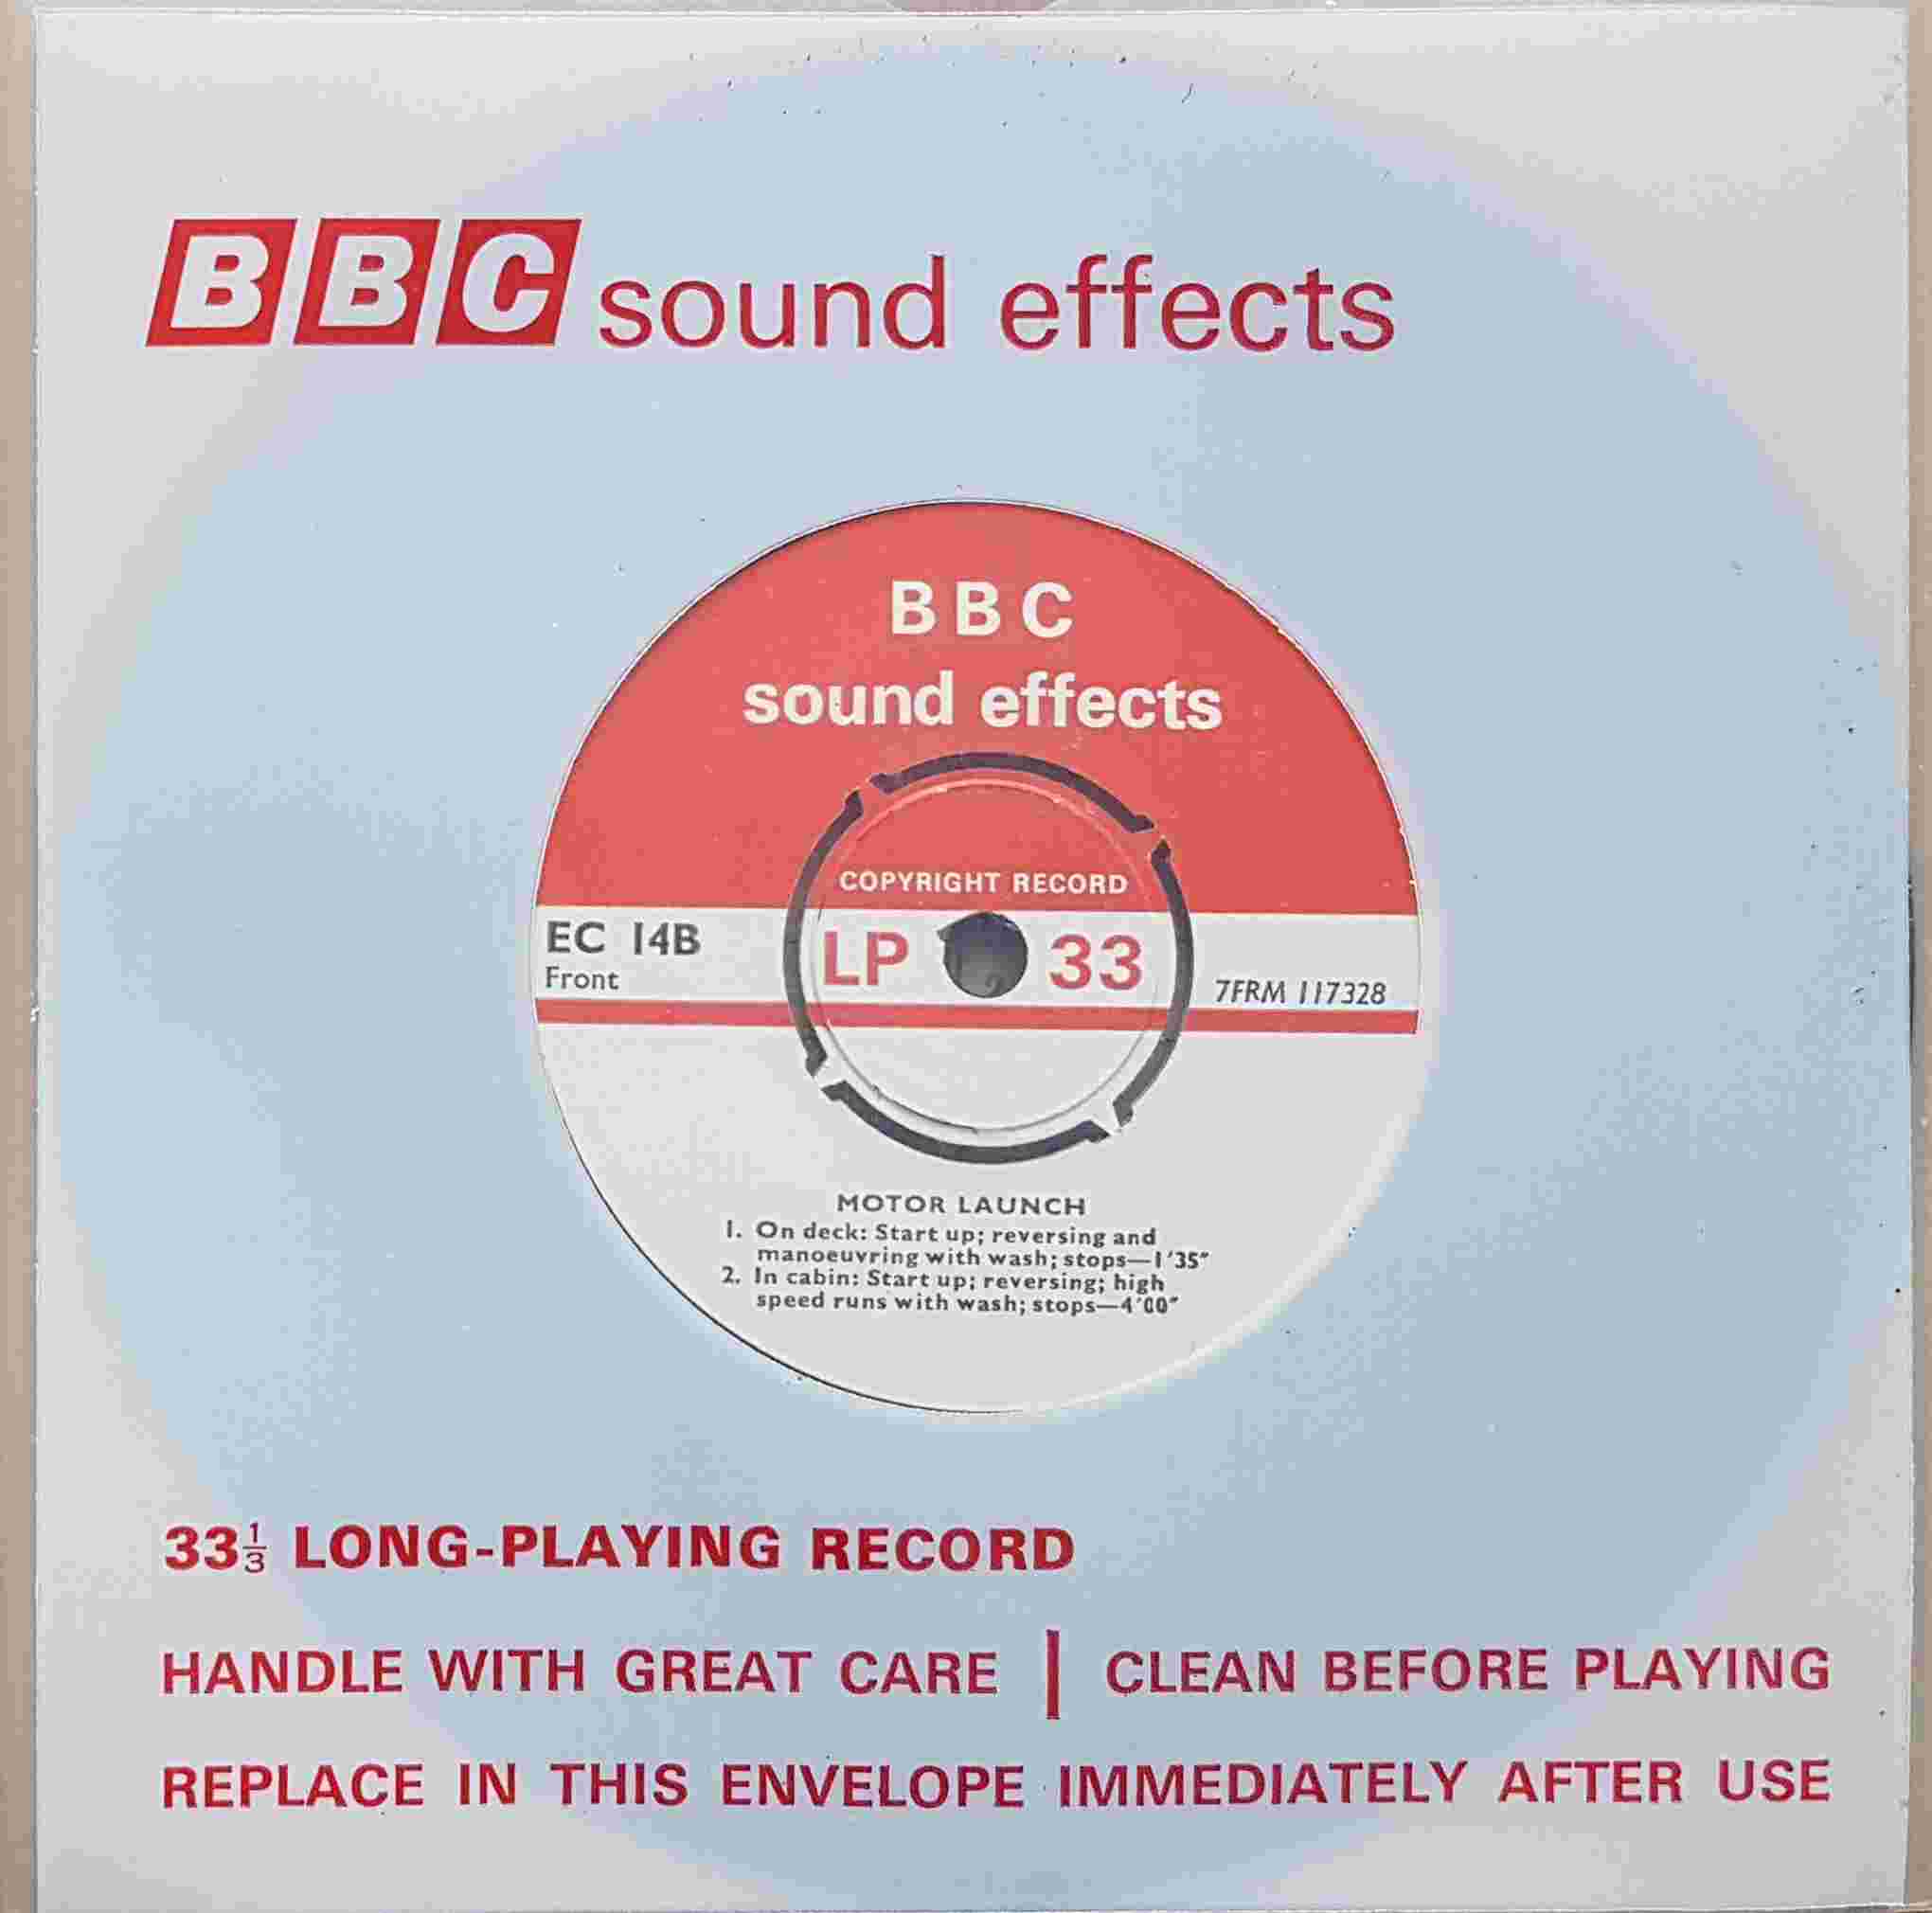 Picture of EC 14B Motor launch by artist Not registered from the BBC singles - Records and Tapes library